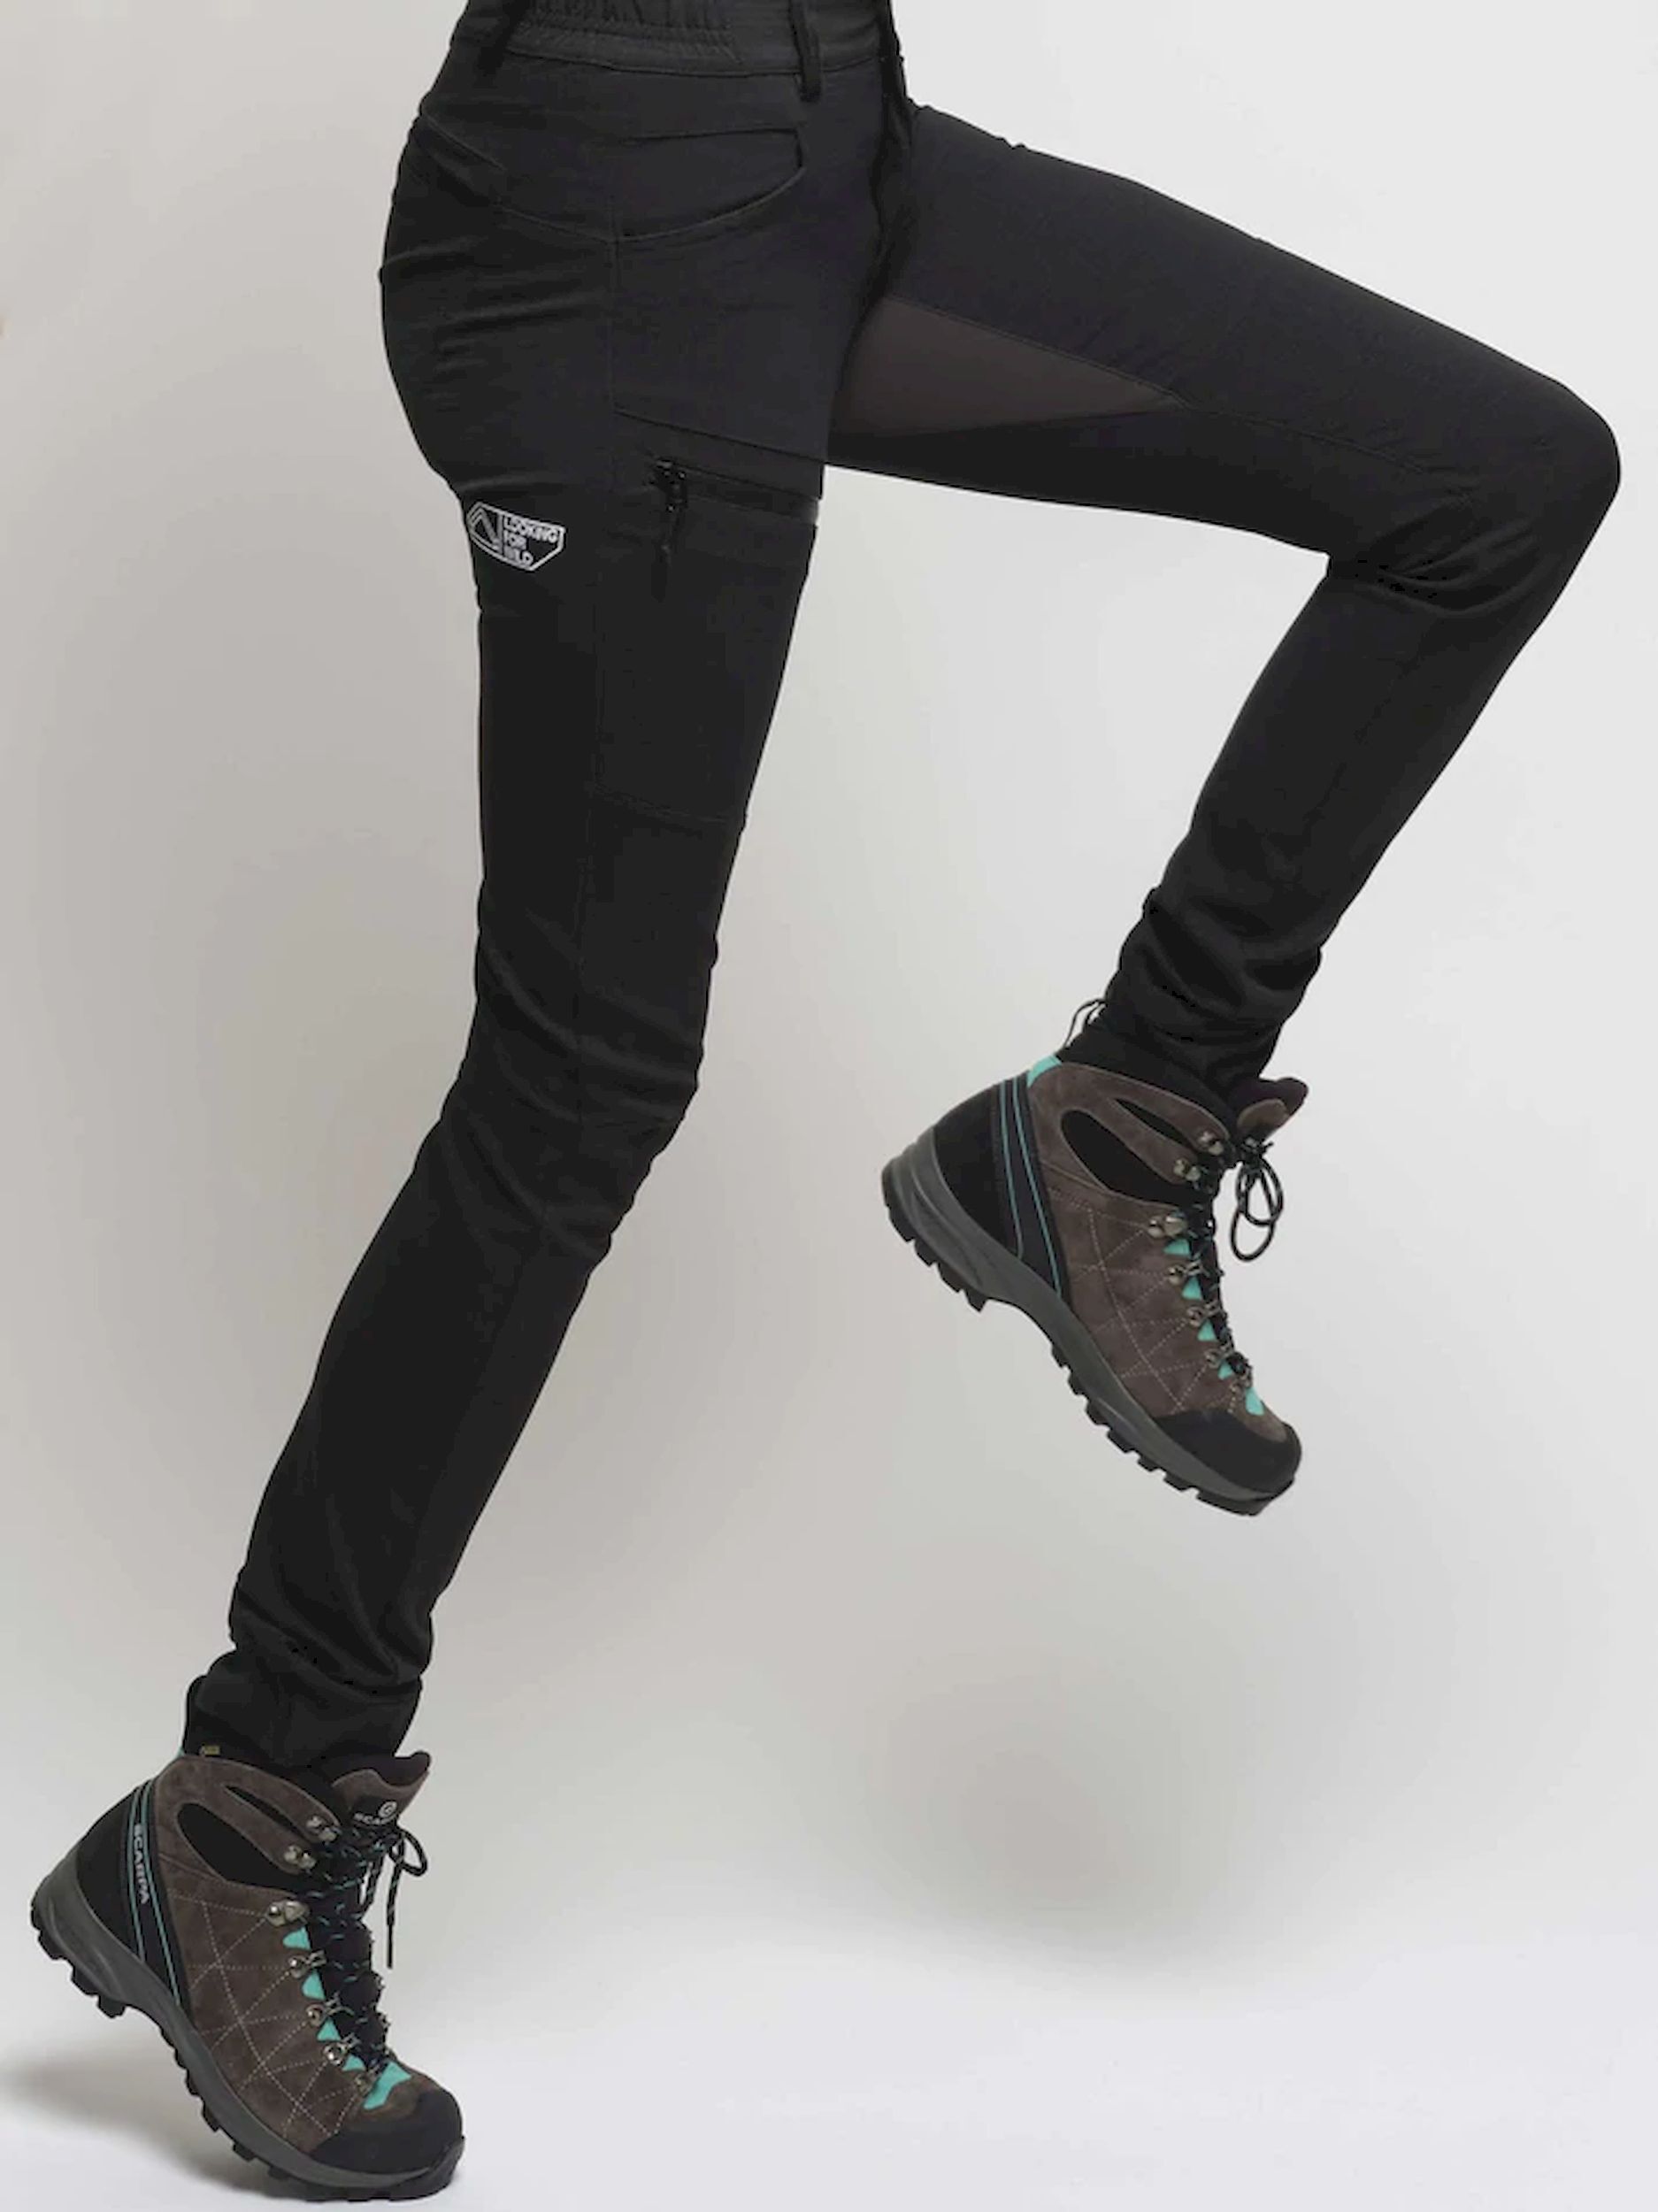 Looking For Wild F-208 - Climbing trousers - Women's